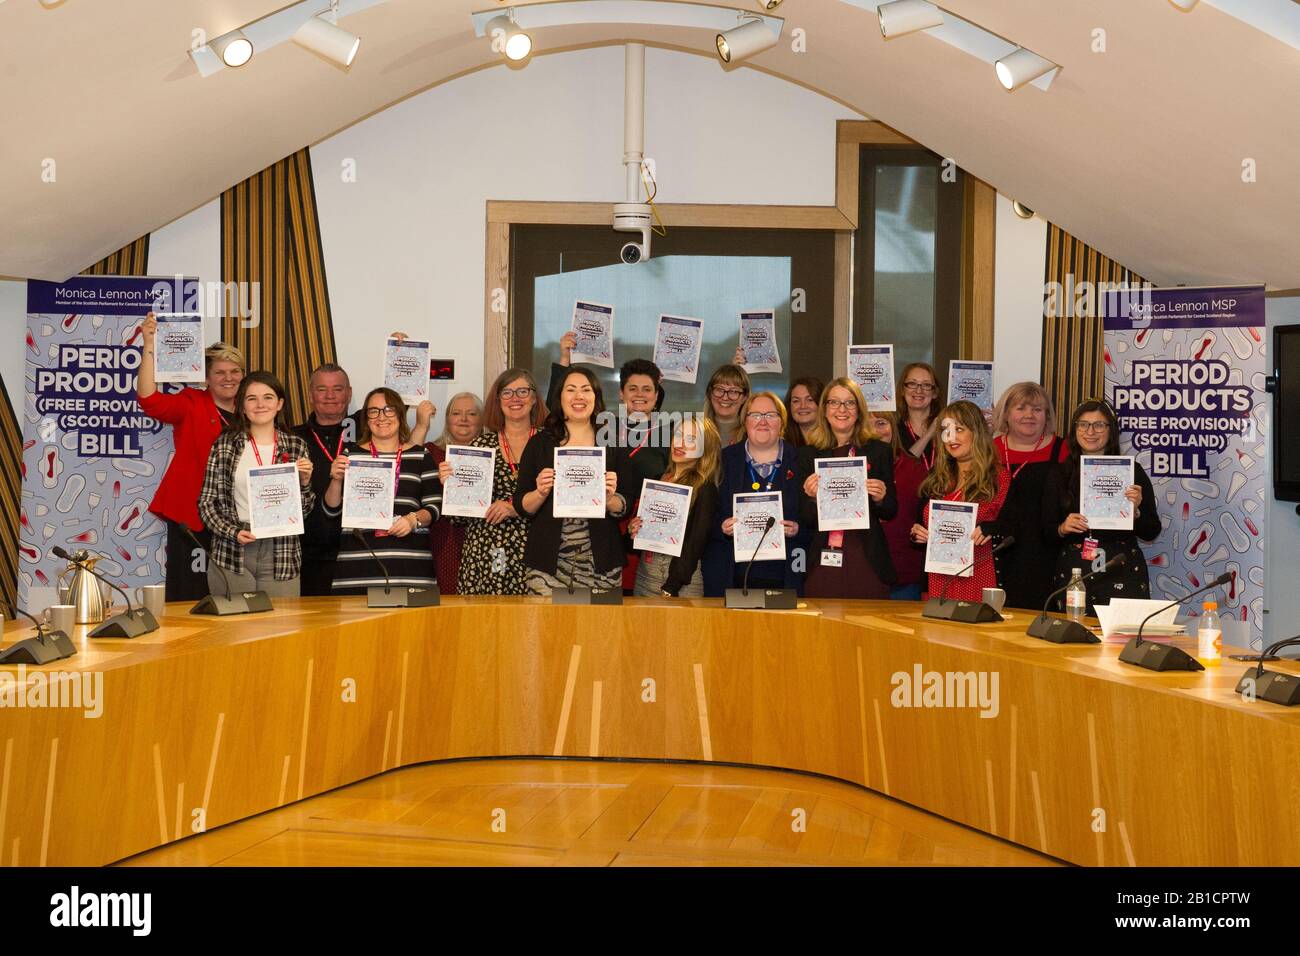 Edinburgh, UK. 6 November 2019.Pictured: (7th from left) Monica Lennon MSP - Shadow Cabinet Secretary for Health And Sport, Member for Central Scotland. Period Products (Free Provision) (Scotland) Bill. Supporters of the Period Products (Free Provision) (Scotland) Bill will join Scottish Labour Shadow Cabinet Secretary for Health and Sport, Monica Lennon MSP to formally back the proposed legislation as it embarks on Stage One of the legislative process. Credit: Colin Fisher/Alamy Live News. Stock Photo